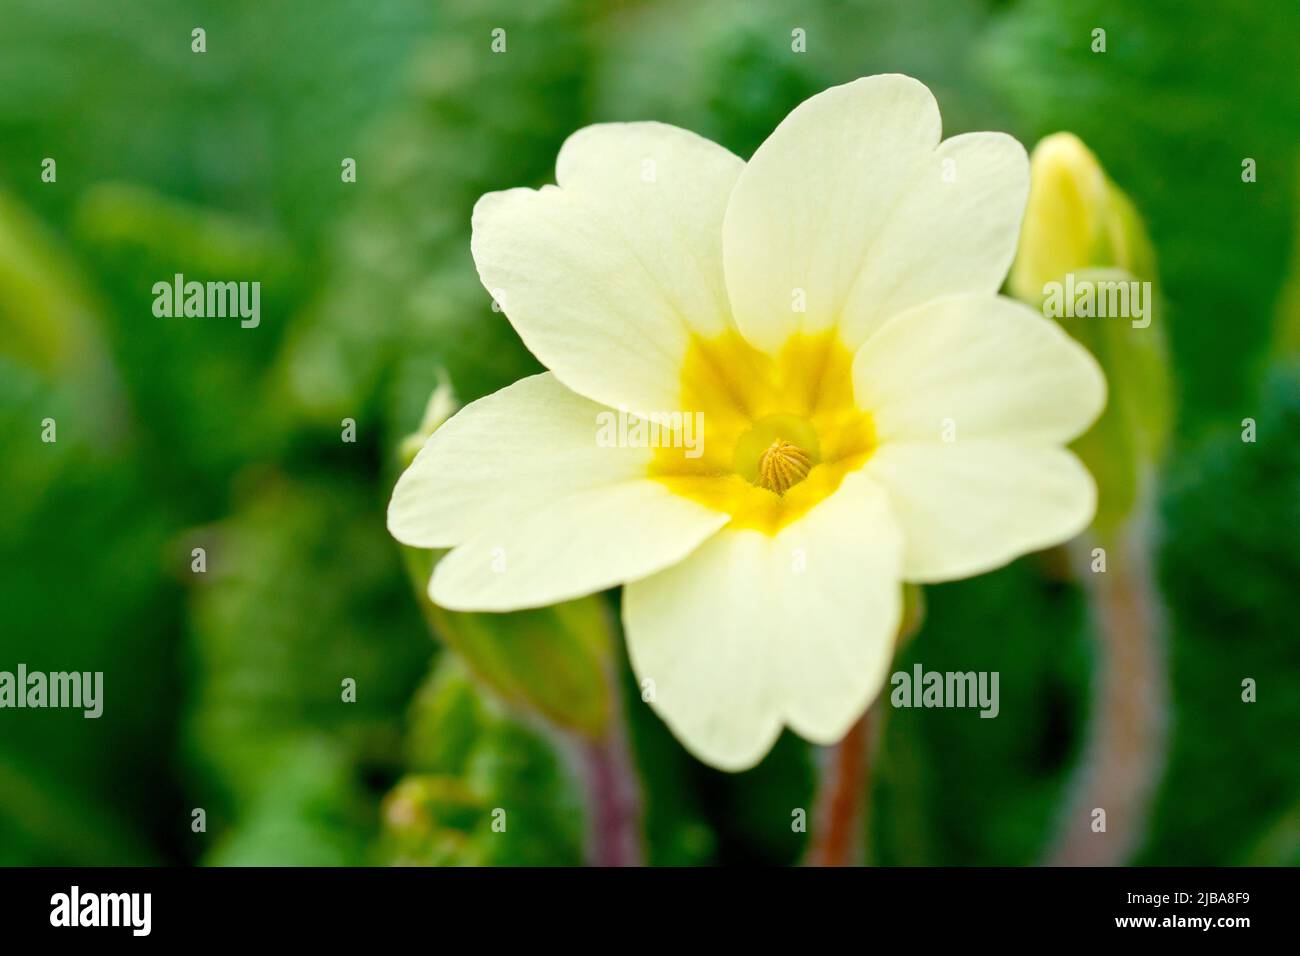 Primrose (primula vulgaris), close up of a single thrum-eyed flower with limited depth of field. Stock Photo